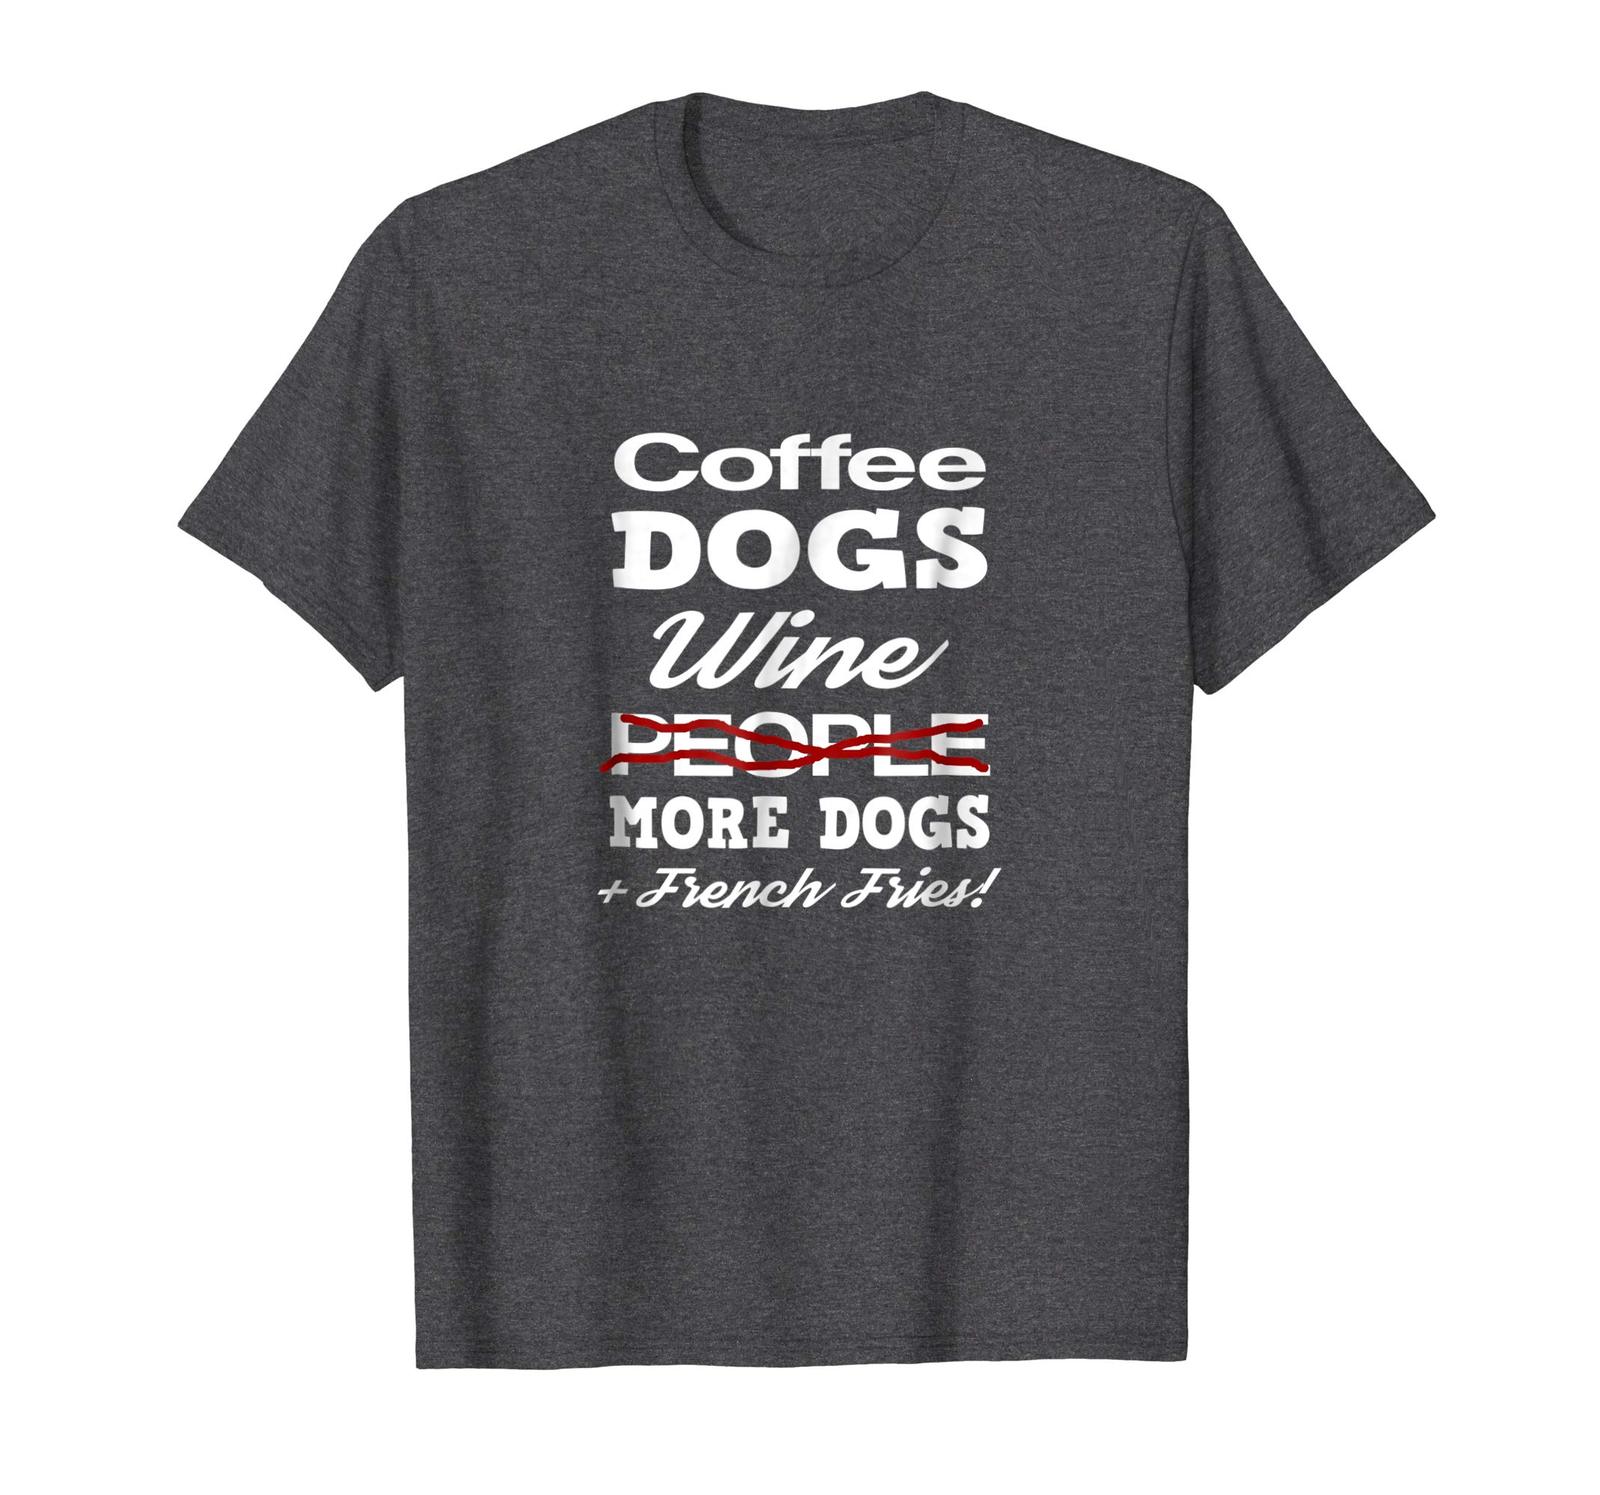 Dog Fashion - Coffee Dogs Wine More Dogs and French Fries Funny T-Shirt Men